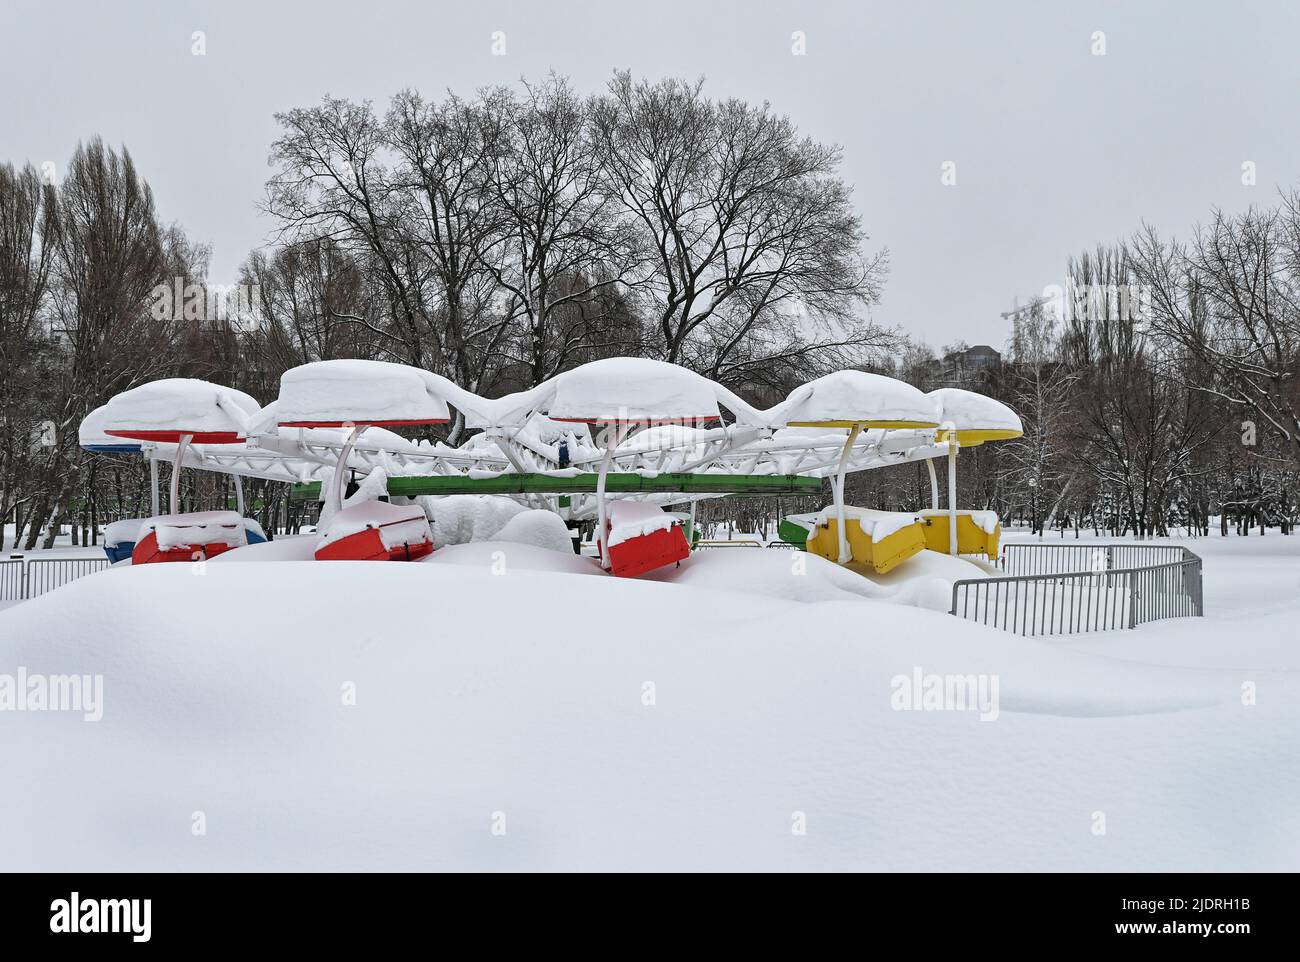 Old snow covered carousel in snowy urban park on gloomy winter day Stock Photo